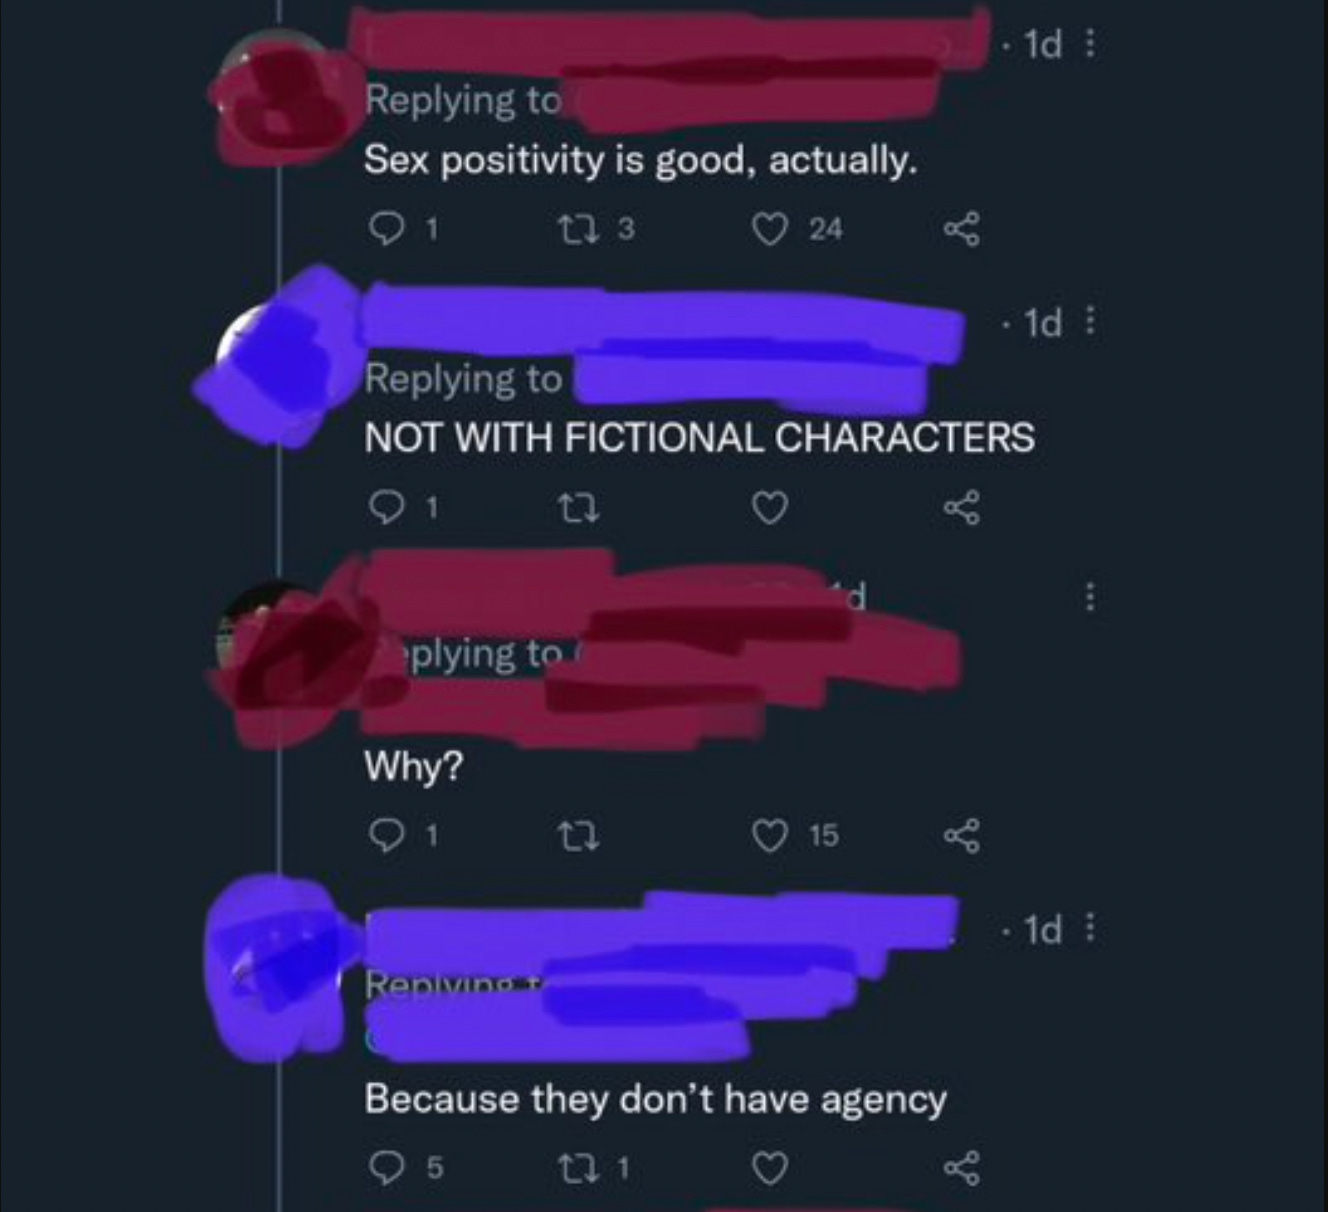 “Sex positivity is good actually.” “NOT WITH FICTIONAL CHARACTERS”. “Why?”. “Because they don’t have agency.”